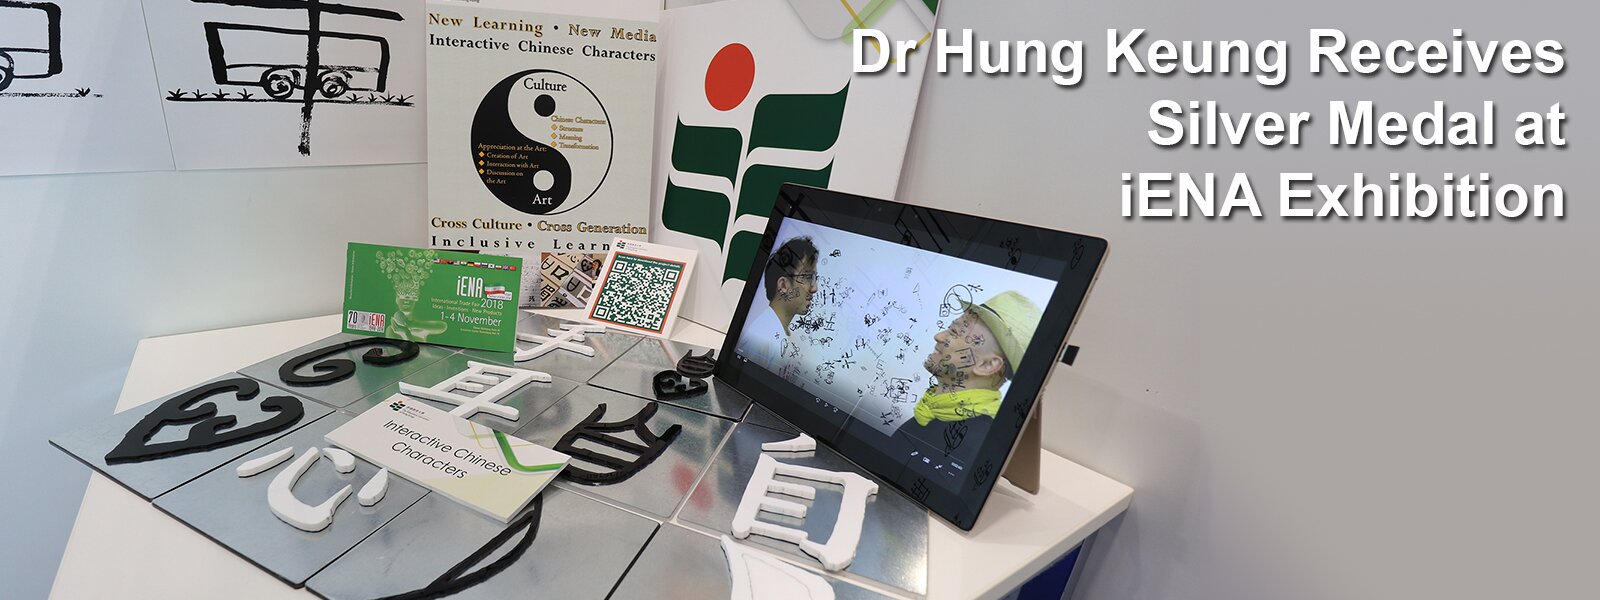 Dr Hung Keung Receives Silver Medal at iENA Exhibition